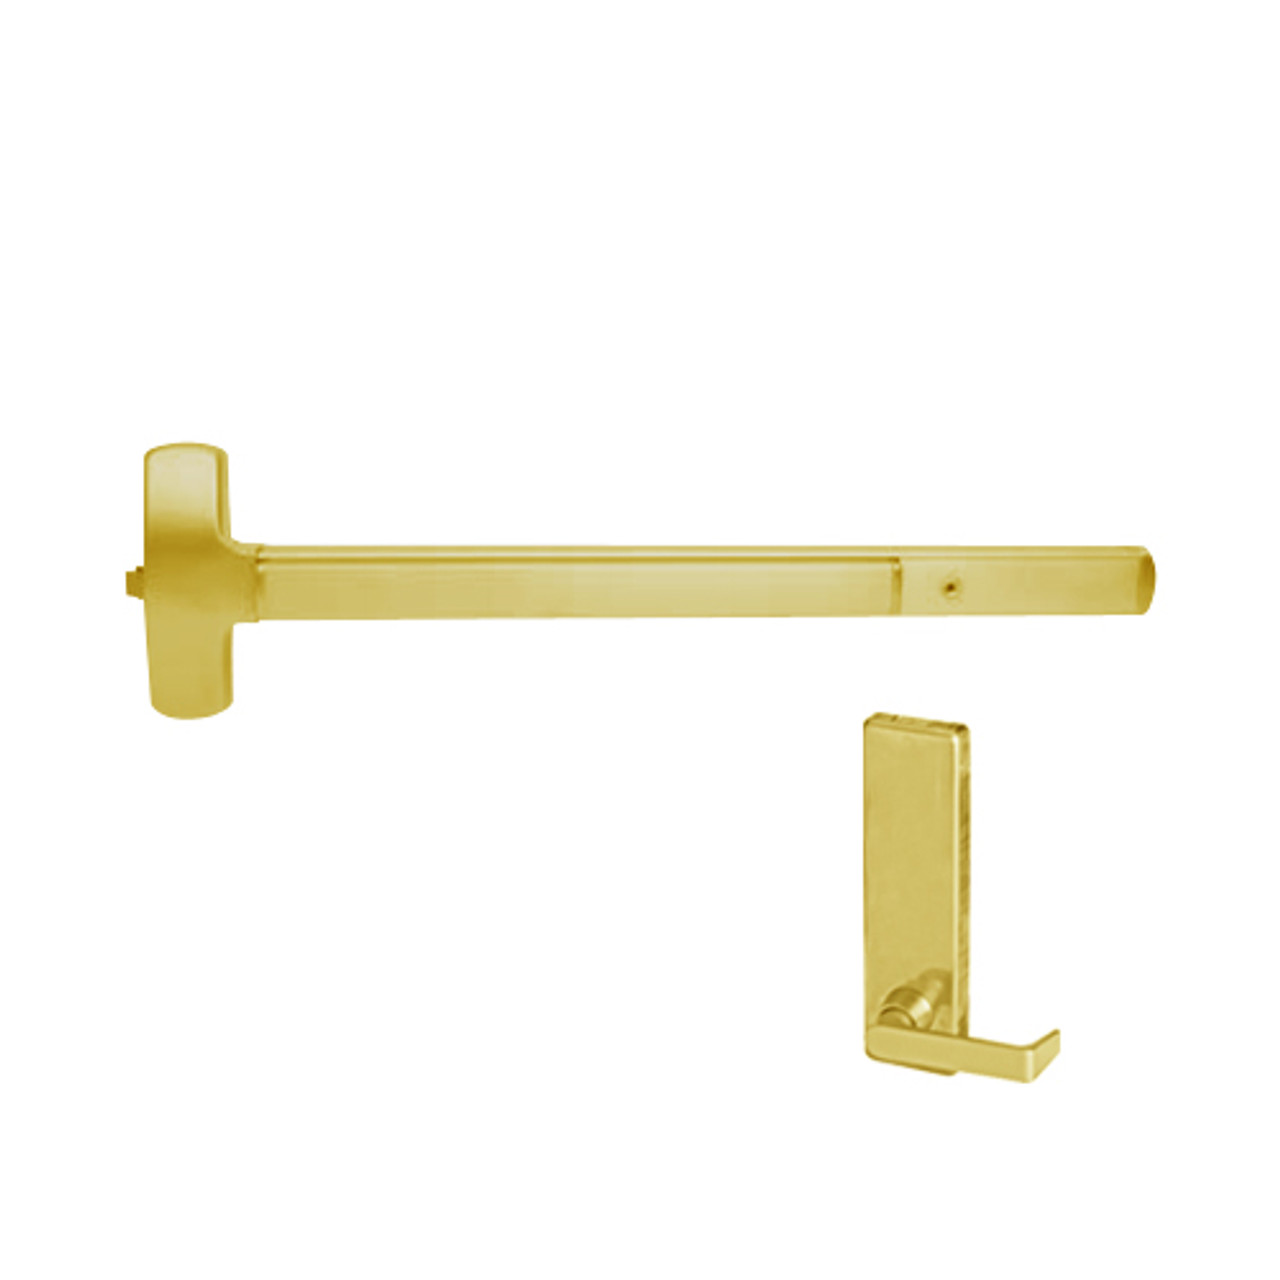 25-R-L-BE-DANE-US4-4-LHR Falcon Exit Device in Satin Brass